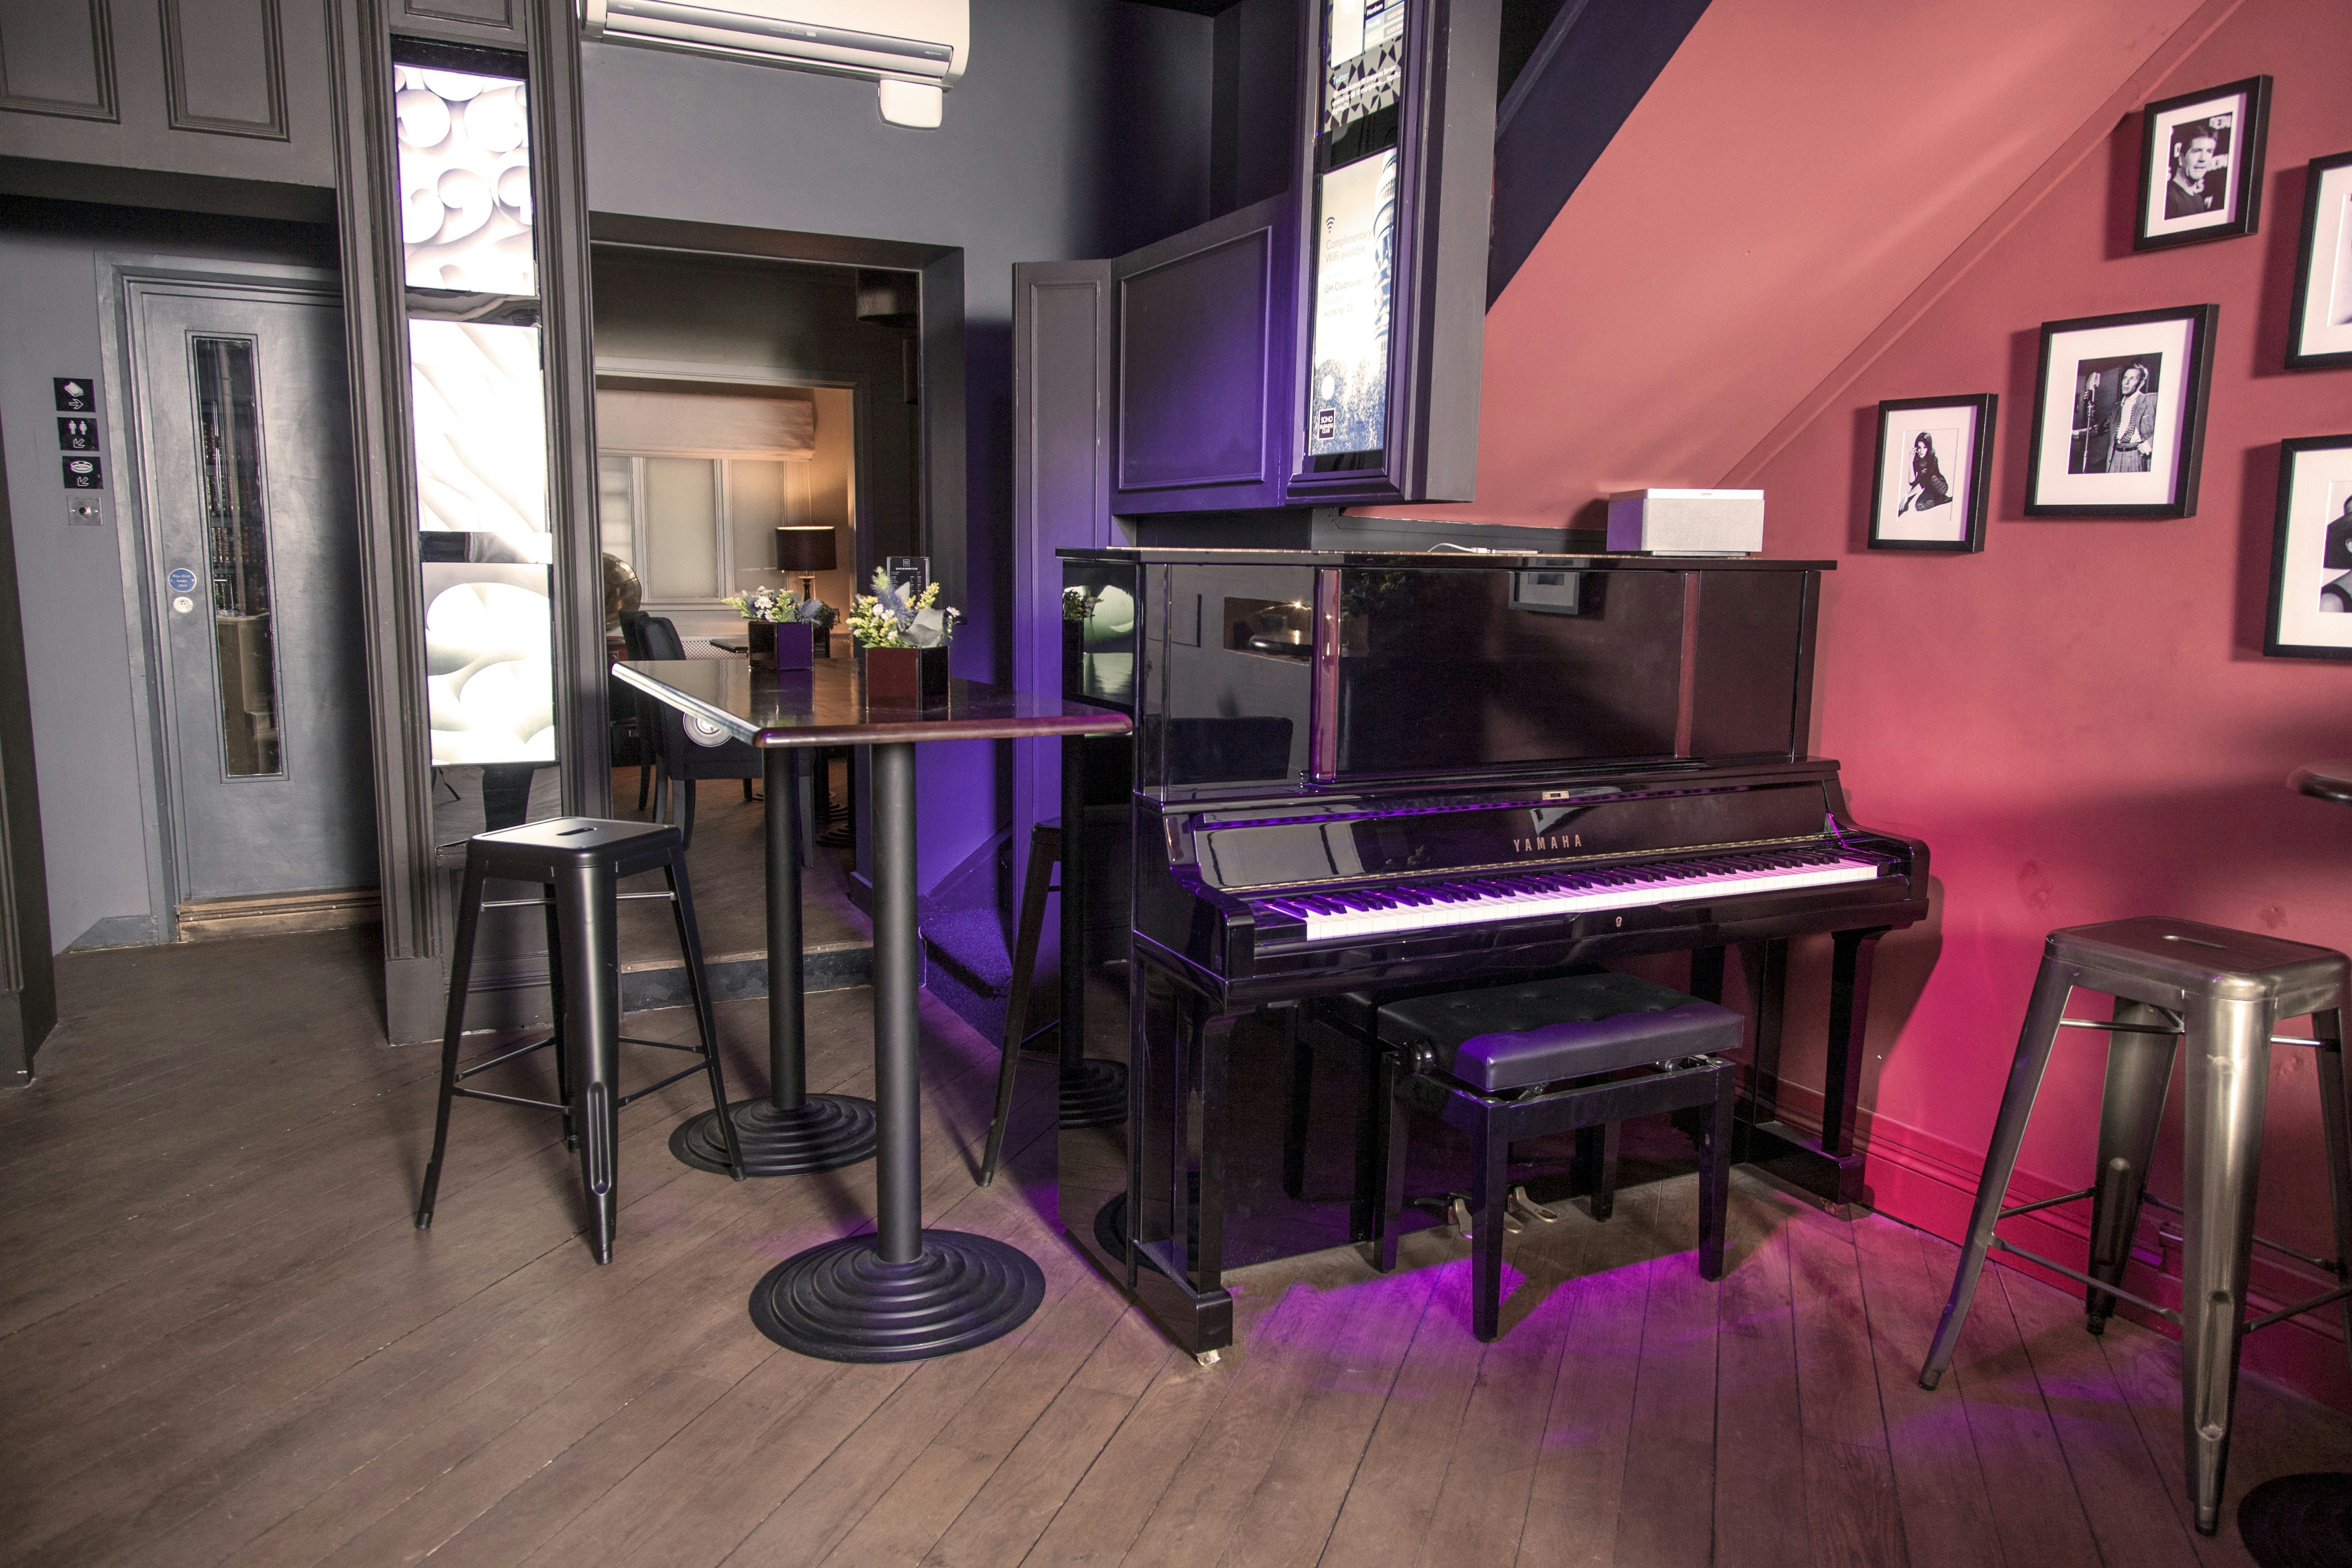 Townhouses Venues in London - Club 16